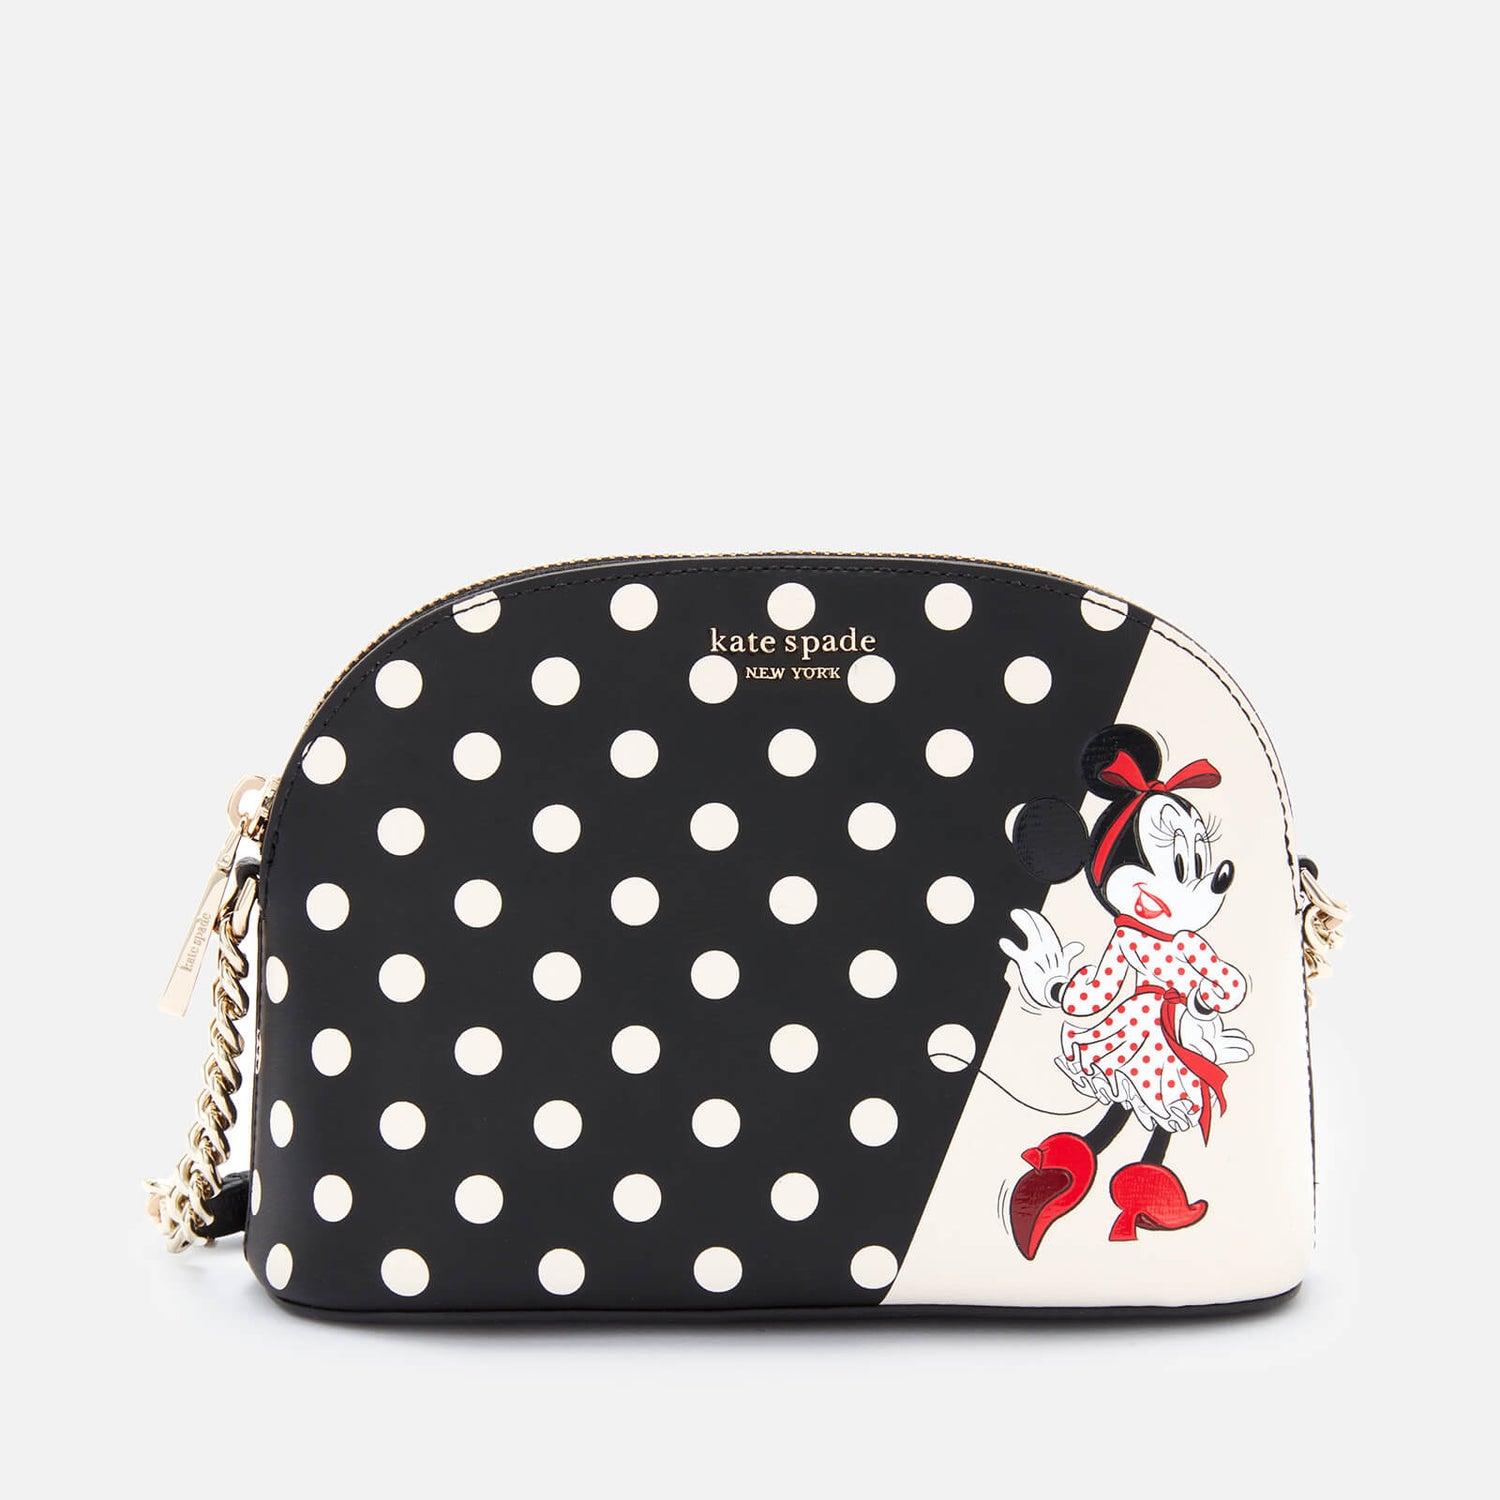 Kate Spade New York Women's Minnie Mouse Small Dome Cross Body Bag ...